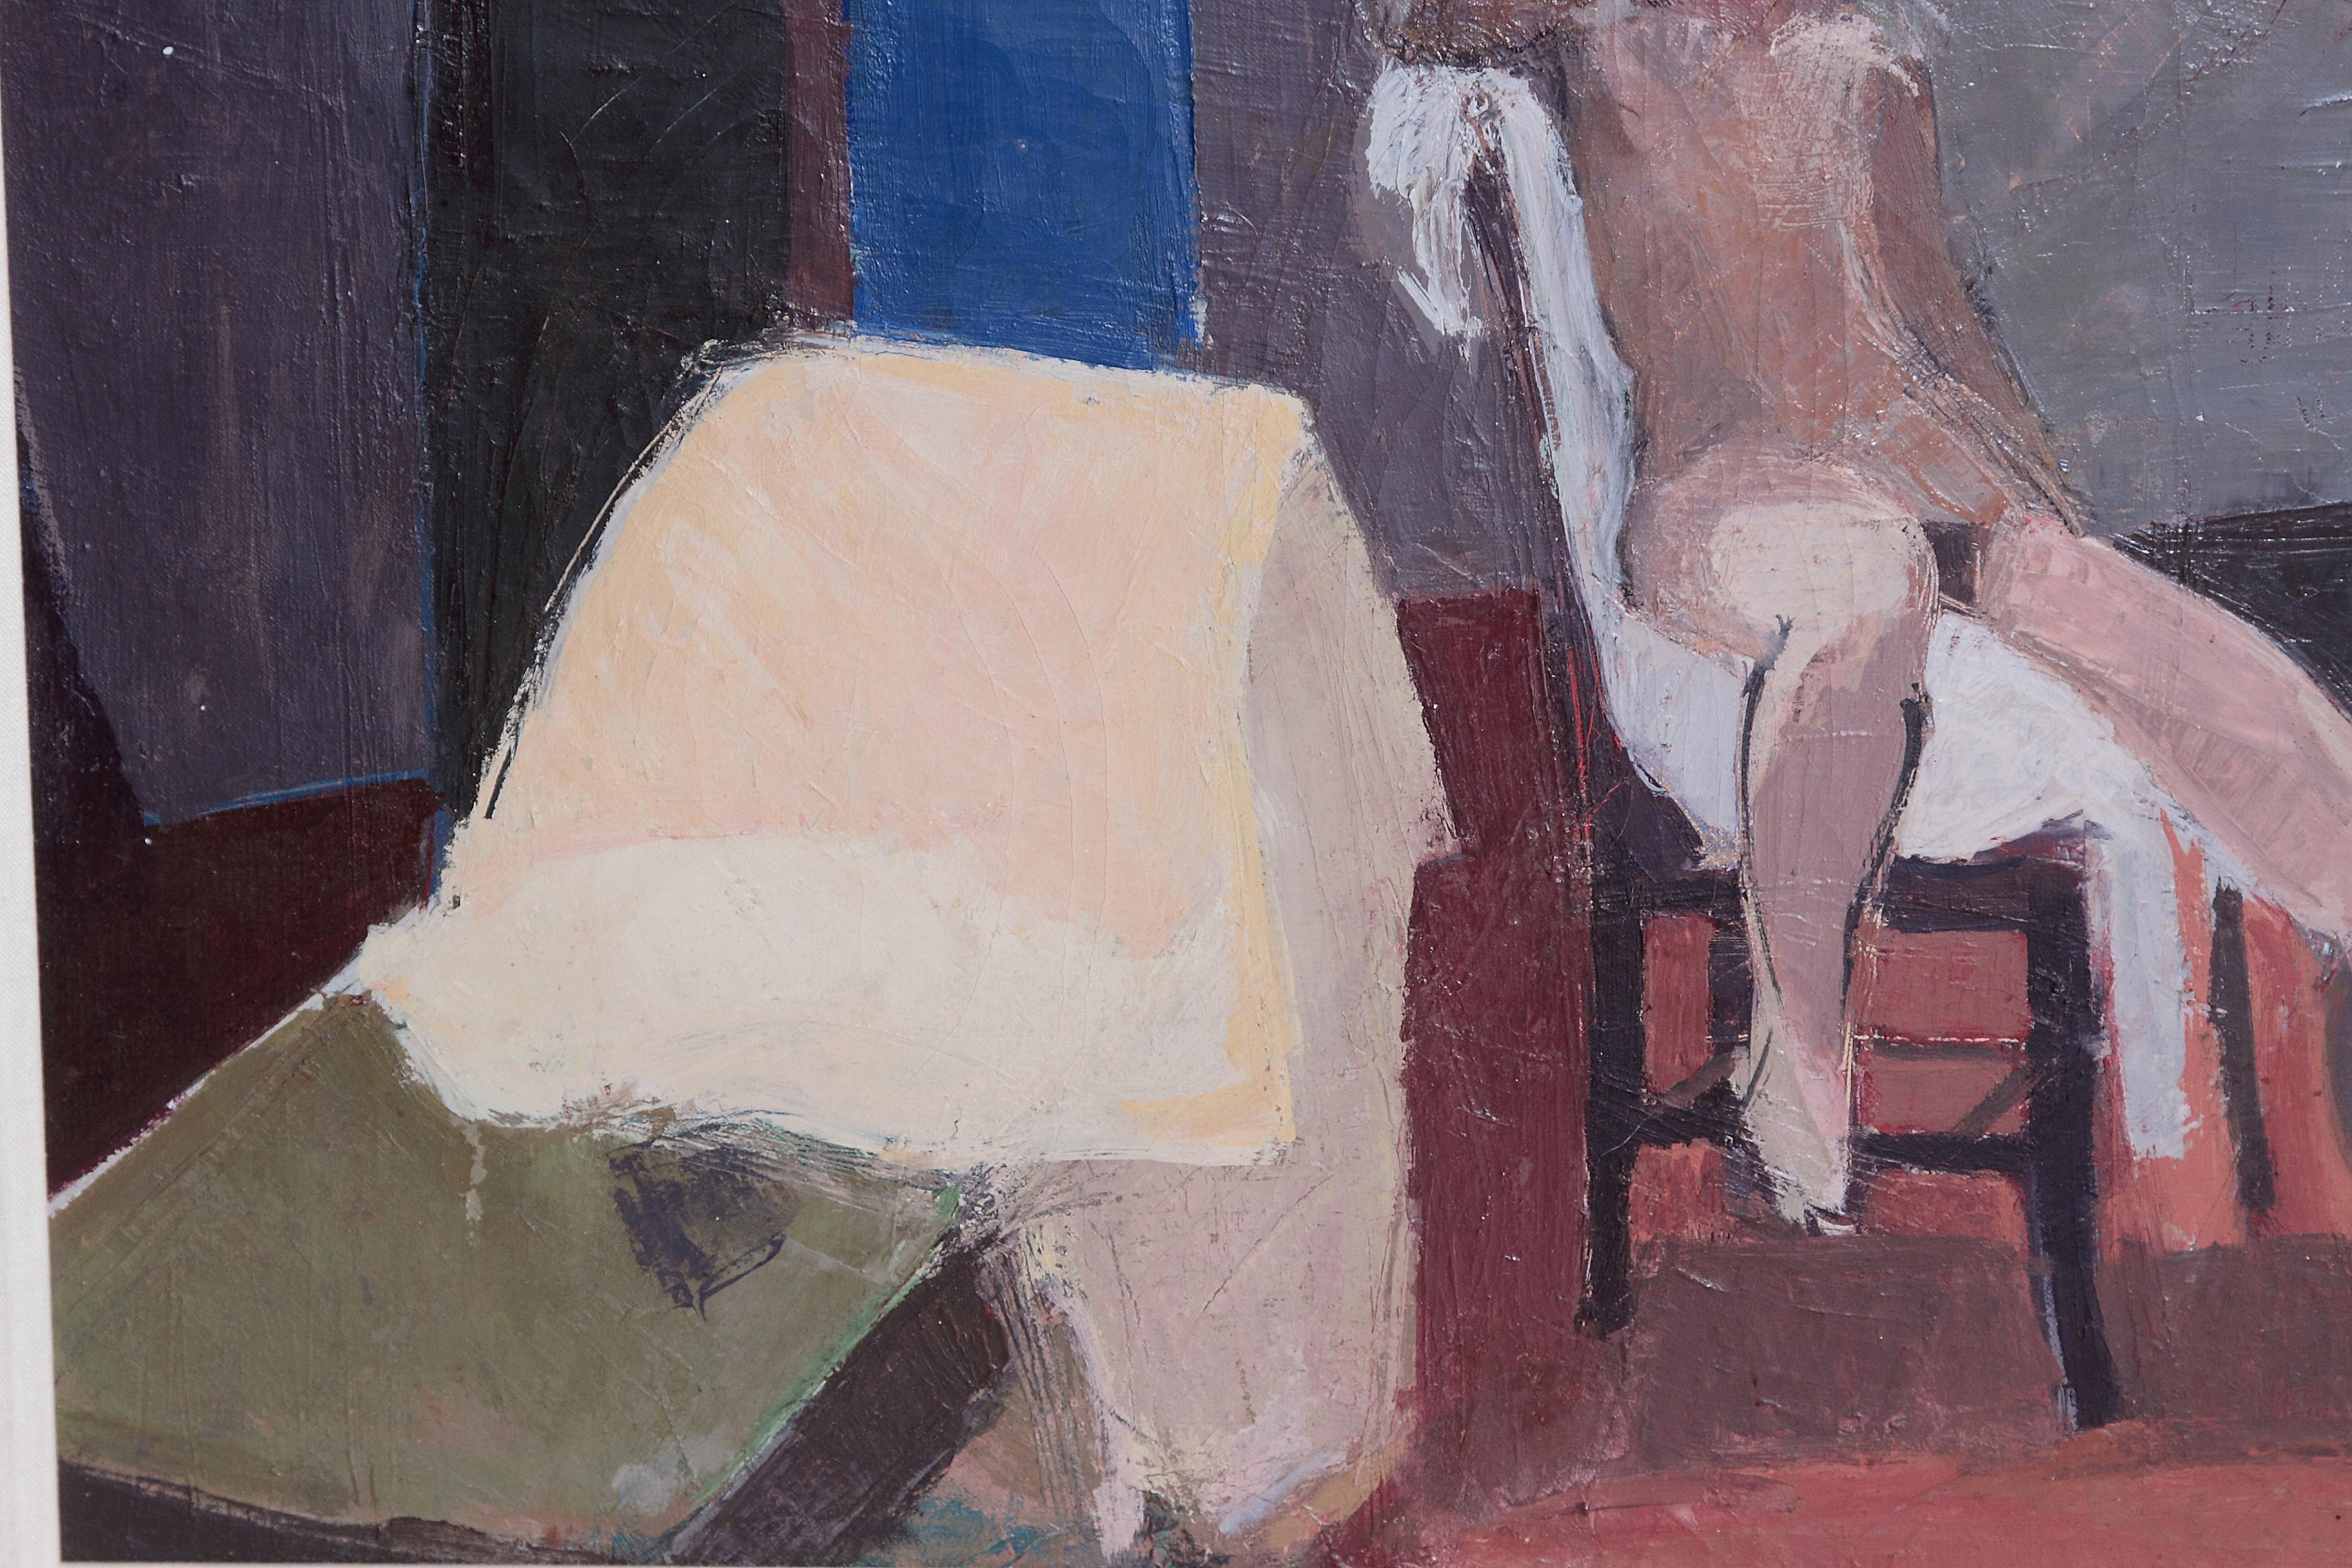 20th Century Contemporary Oil on Canvas of a Nude in an Interior Seated on a Chair